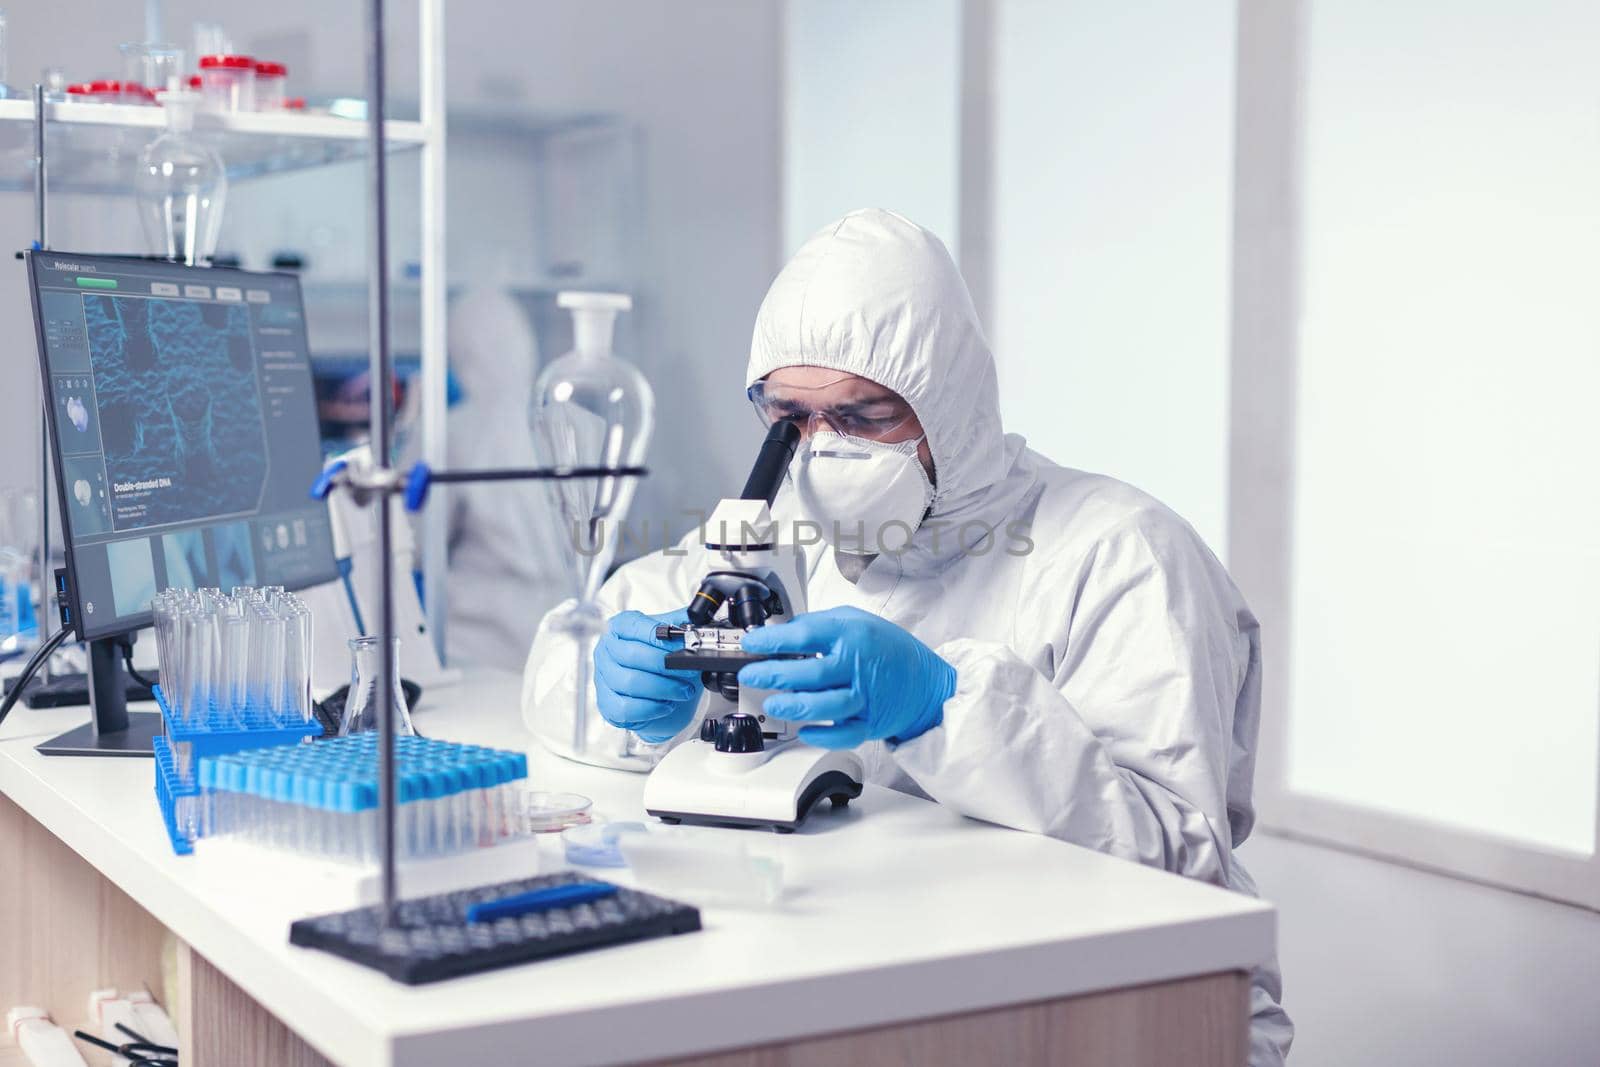 Biotechnology scientist in ppe suit researching cure for coronavirus using microscope in modern laboratory. Virolog in coverall during coronavirus outbreak conducting healthcare scientific analysis.